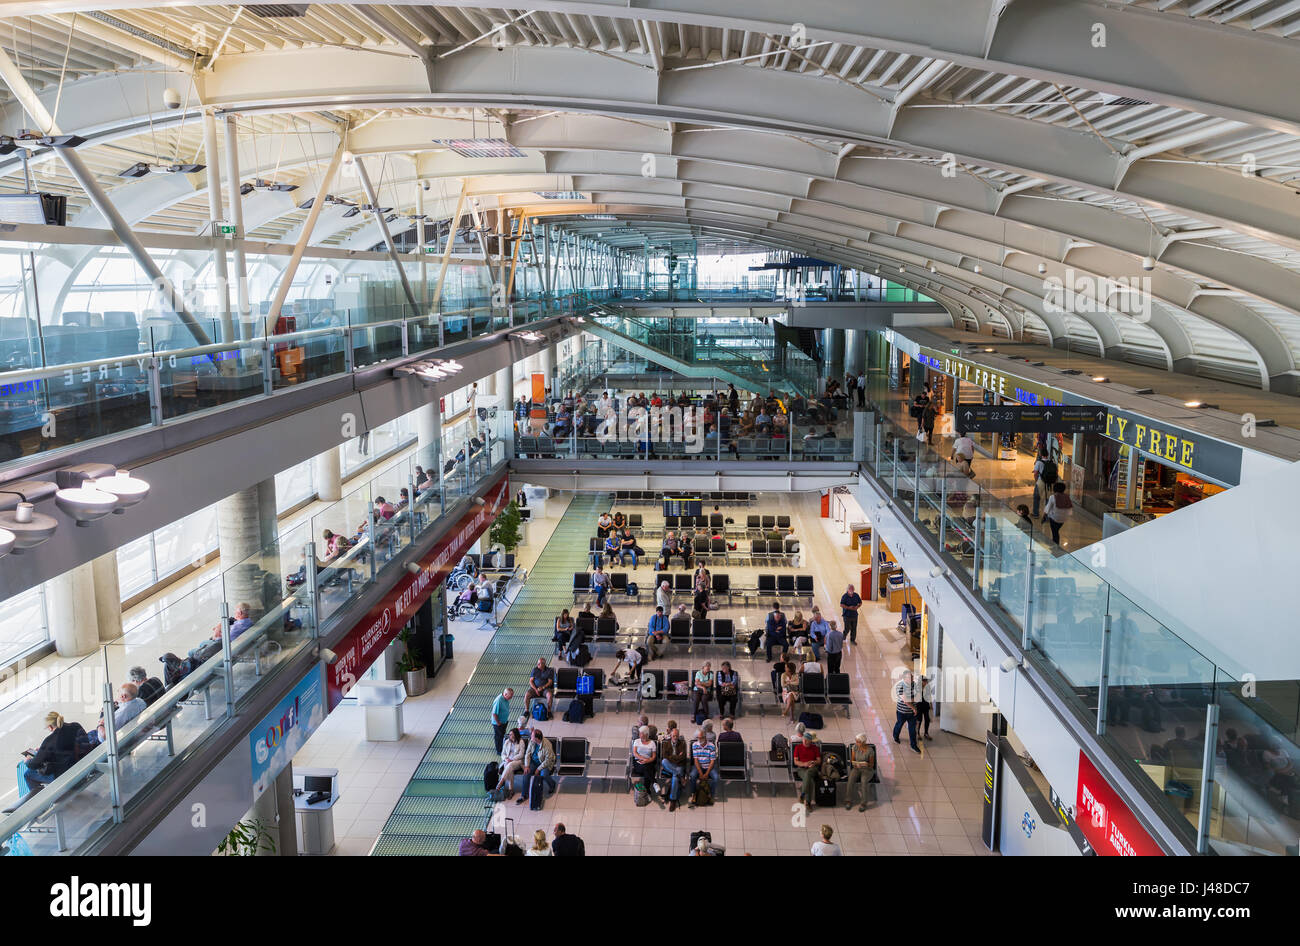 Multiple image panorama of Dubrovnik's modern airport terminal full of passenger awaiting their flights home from the Pearl of the Adriatic. Stock Photo